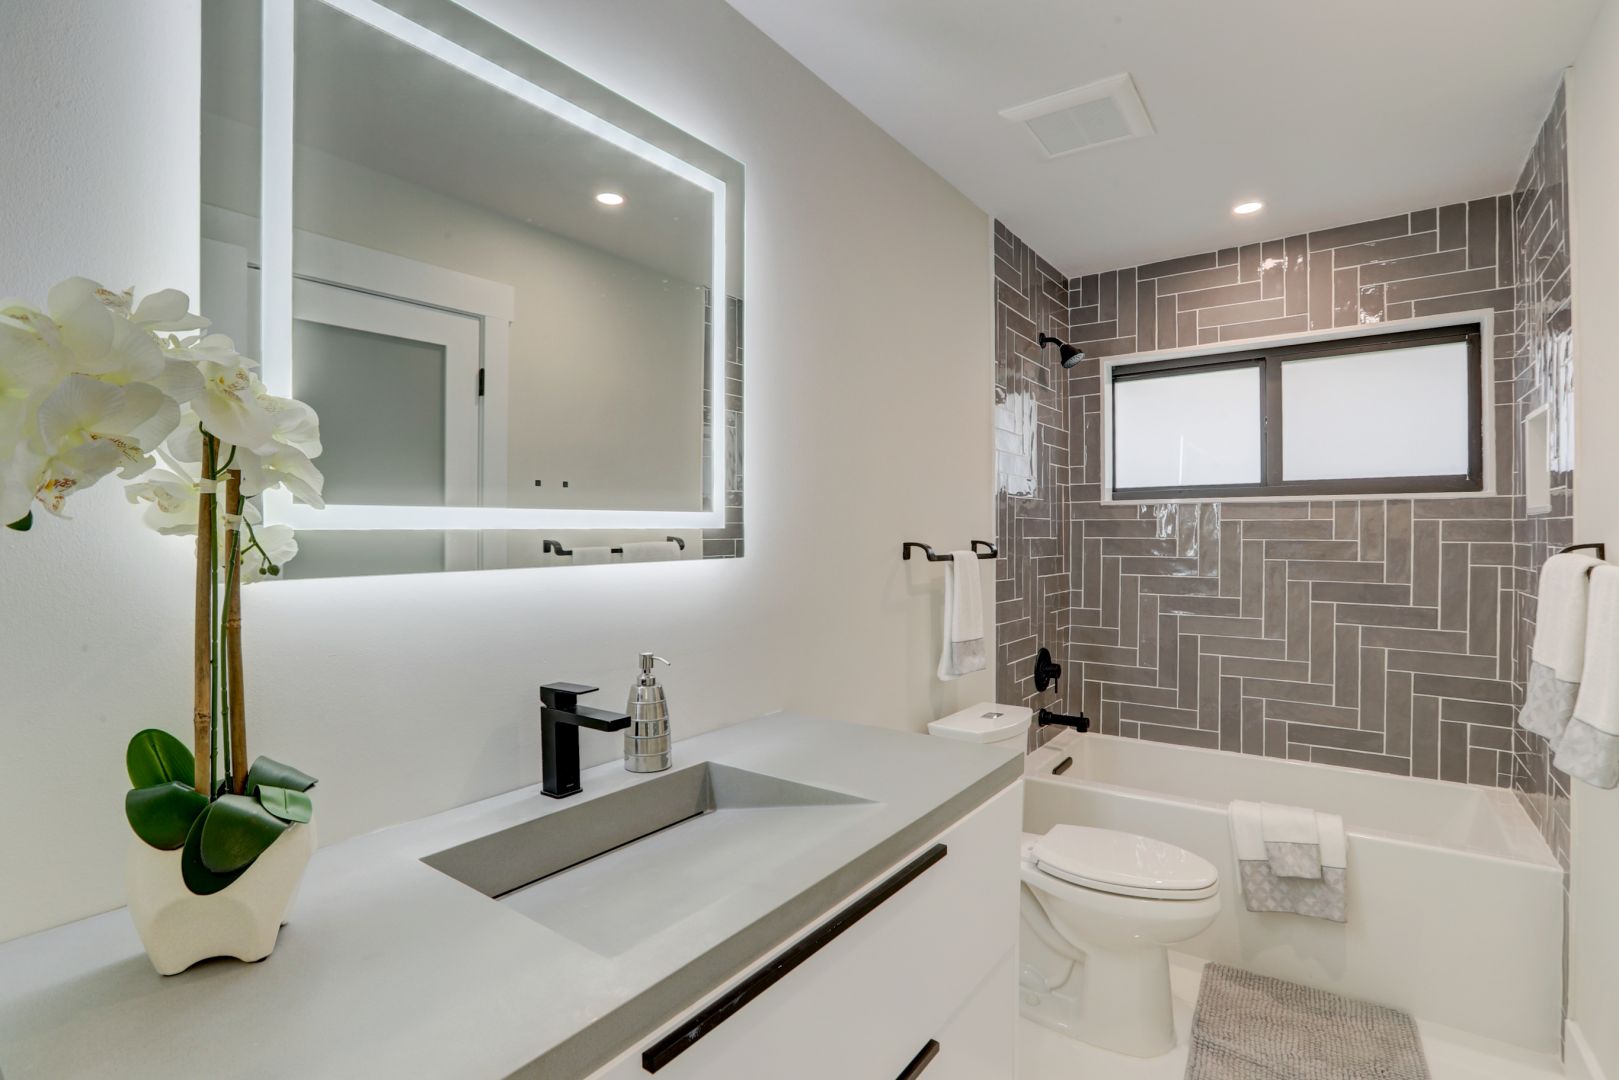 Reasons to Invest in Remodeling Your Bathroom